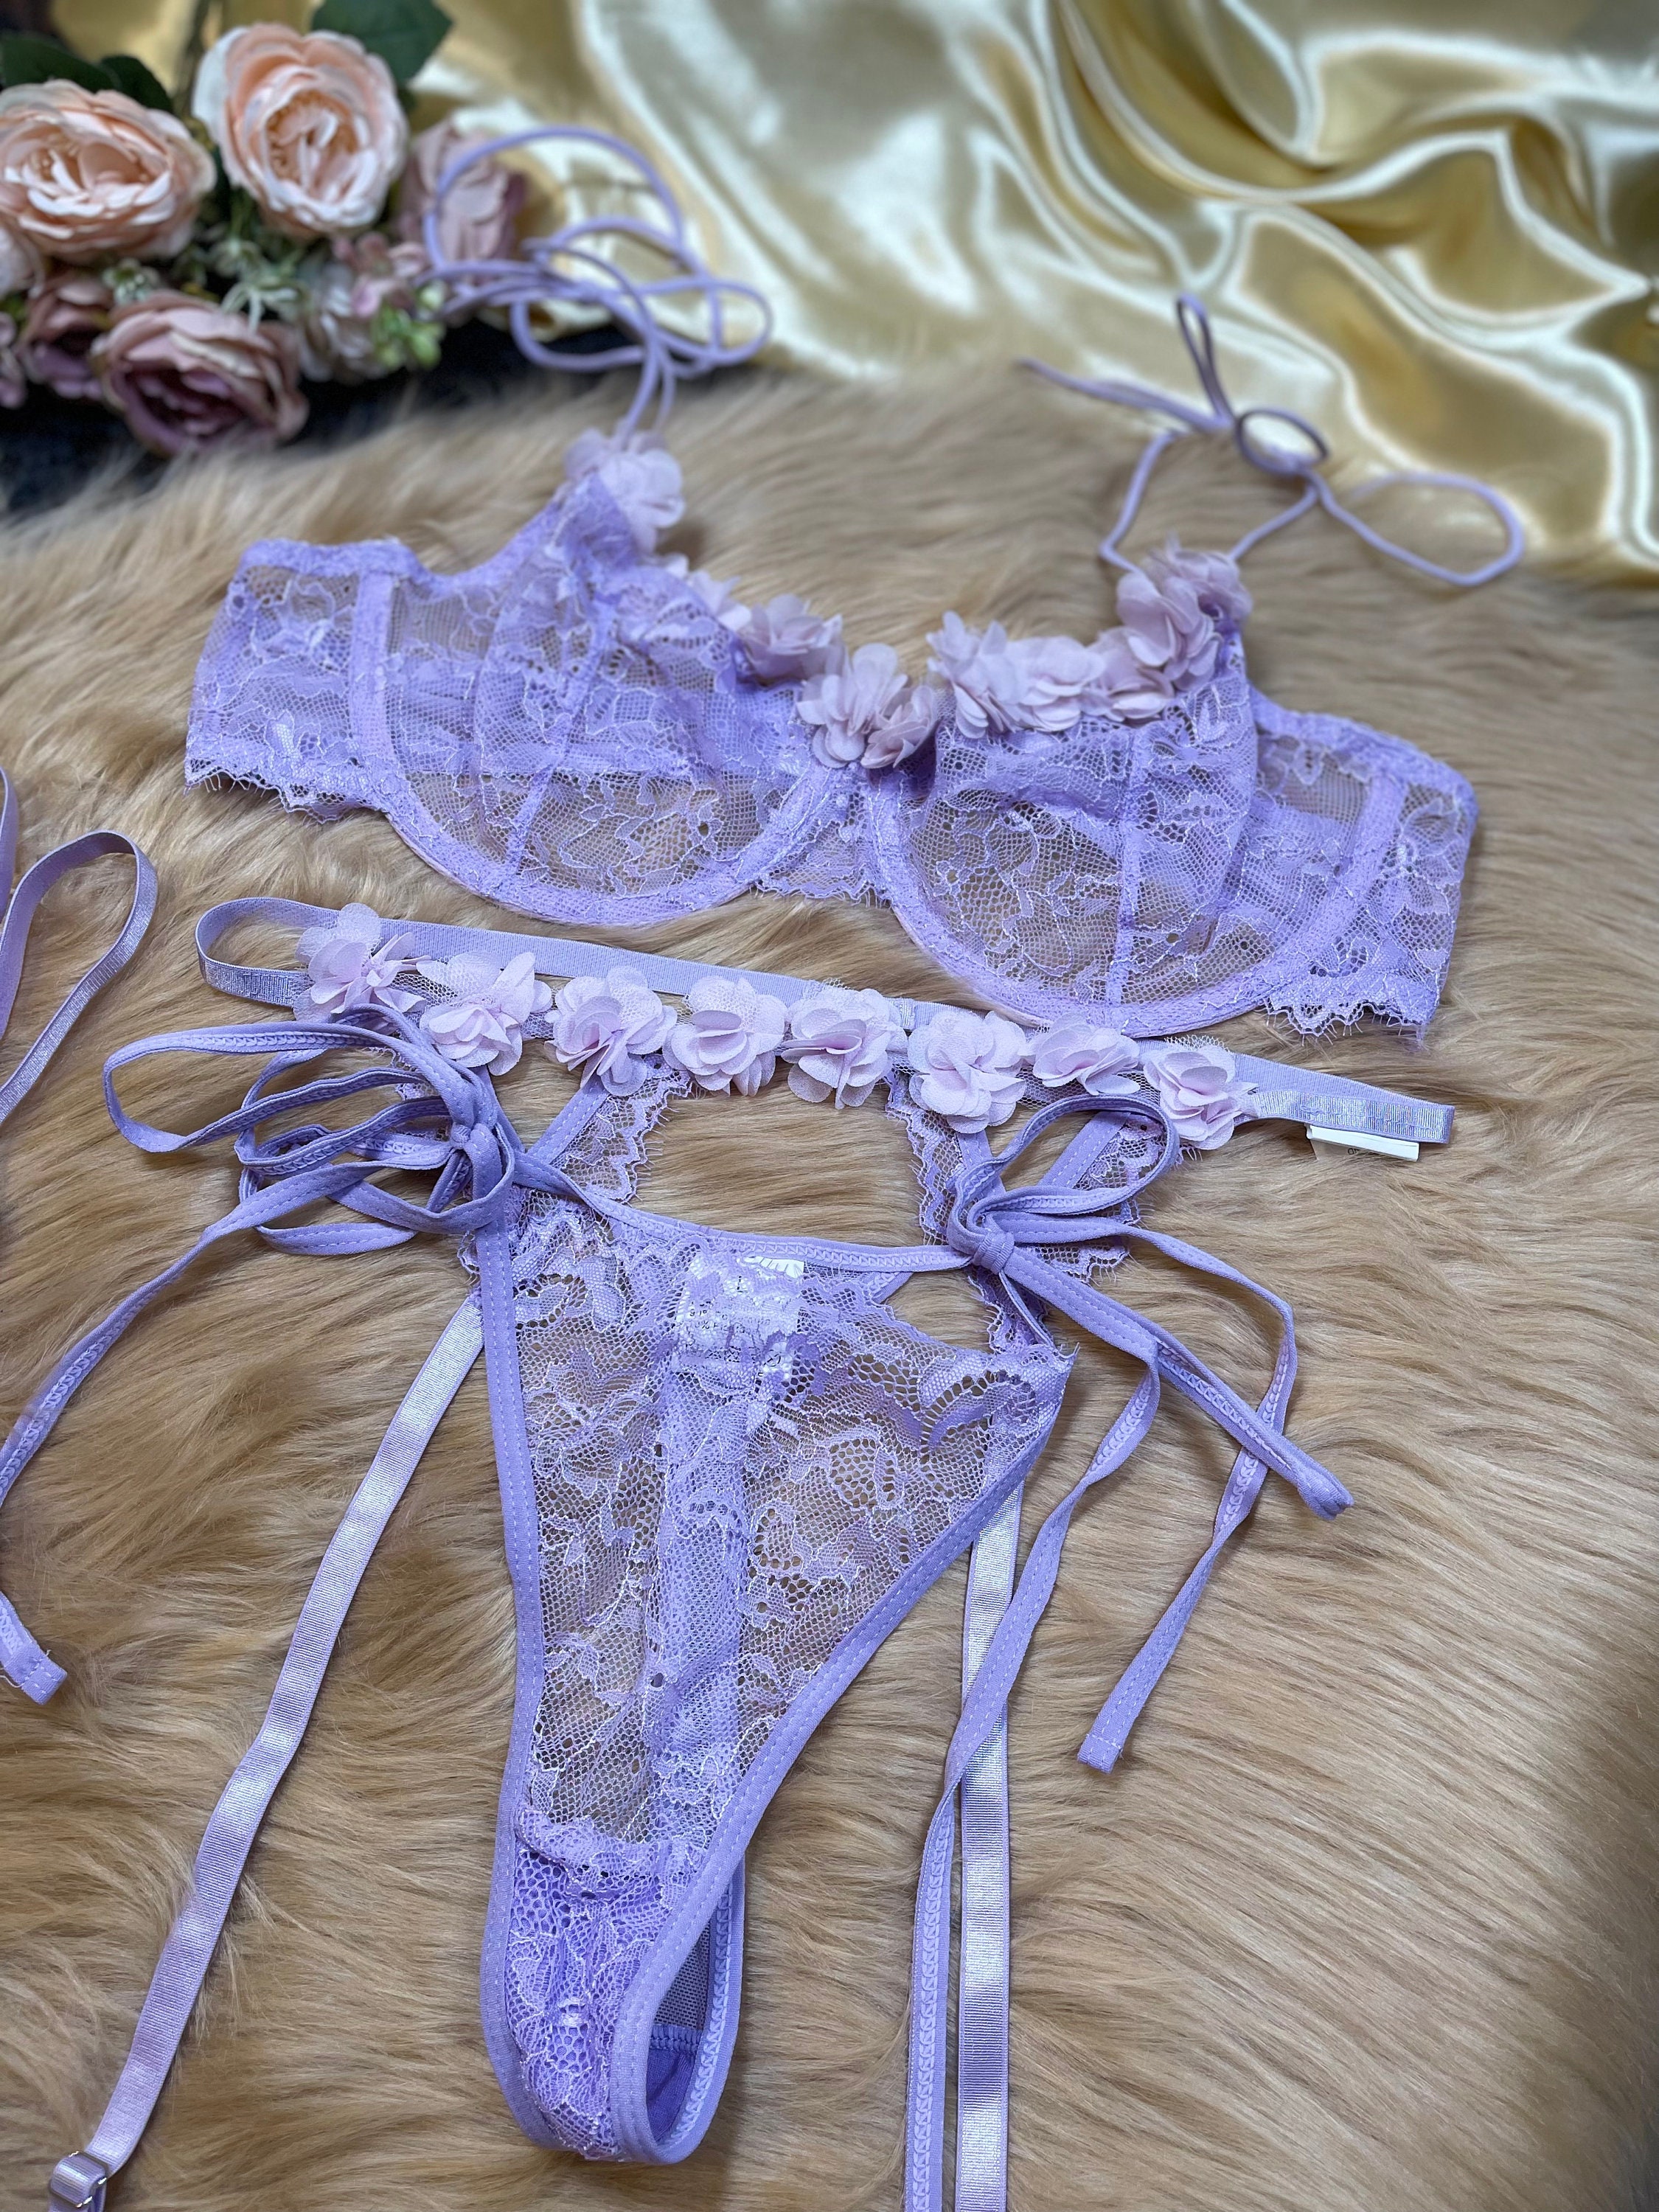 Sheer Bra Lingerie, Transparent Underwear, See through Cute Bralette, Lilac  Ruffle Polka Dot, Frilly Lavender Tulle -  Portugal